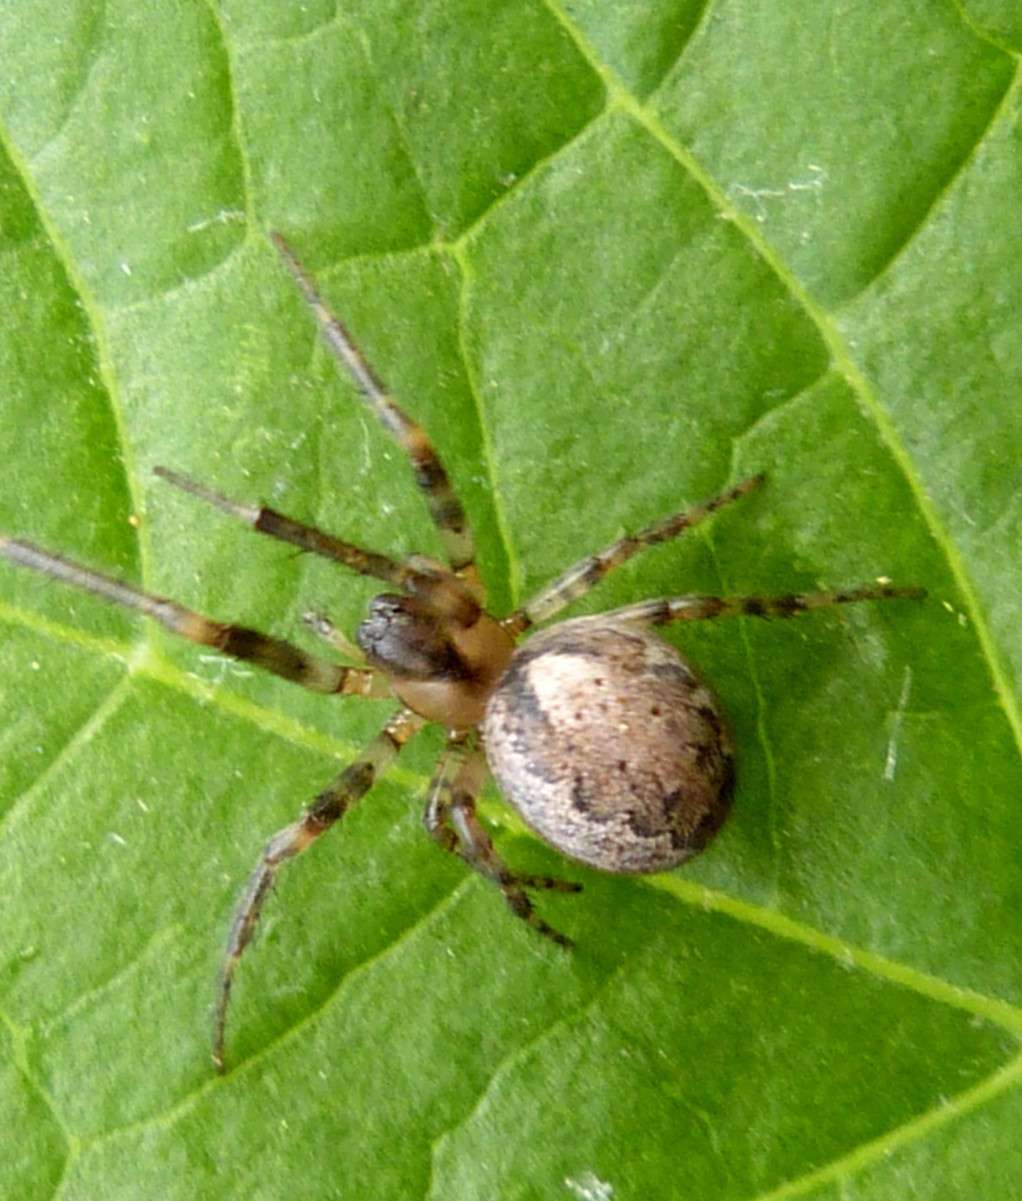 Silver-Sided Sector Spider